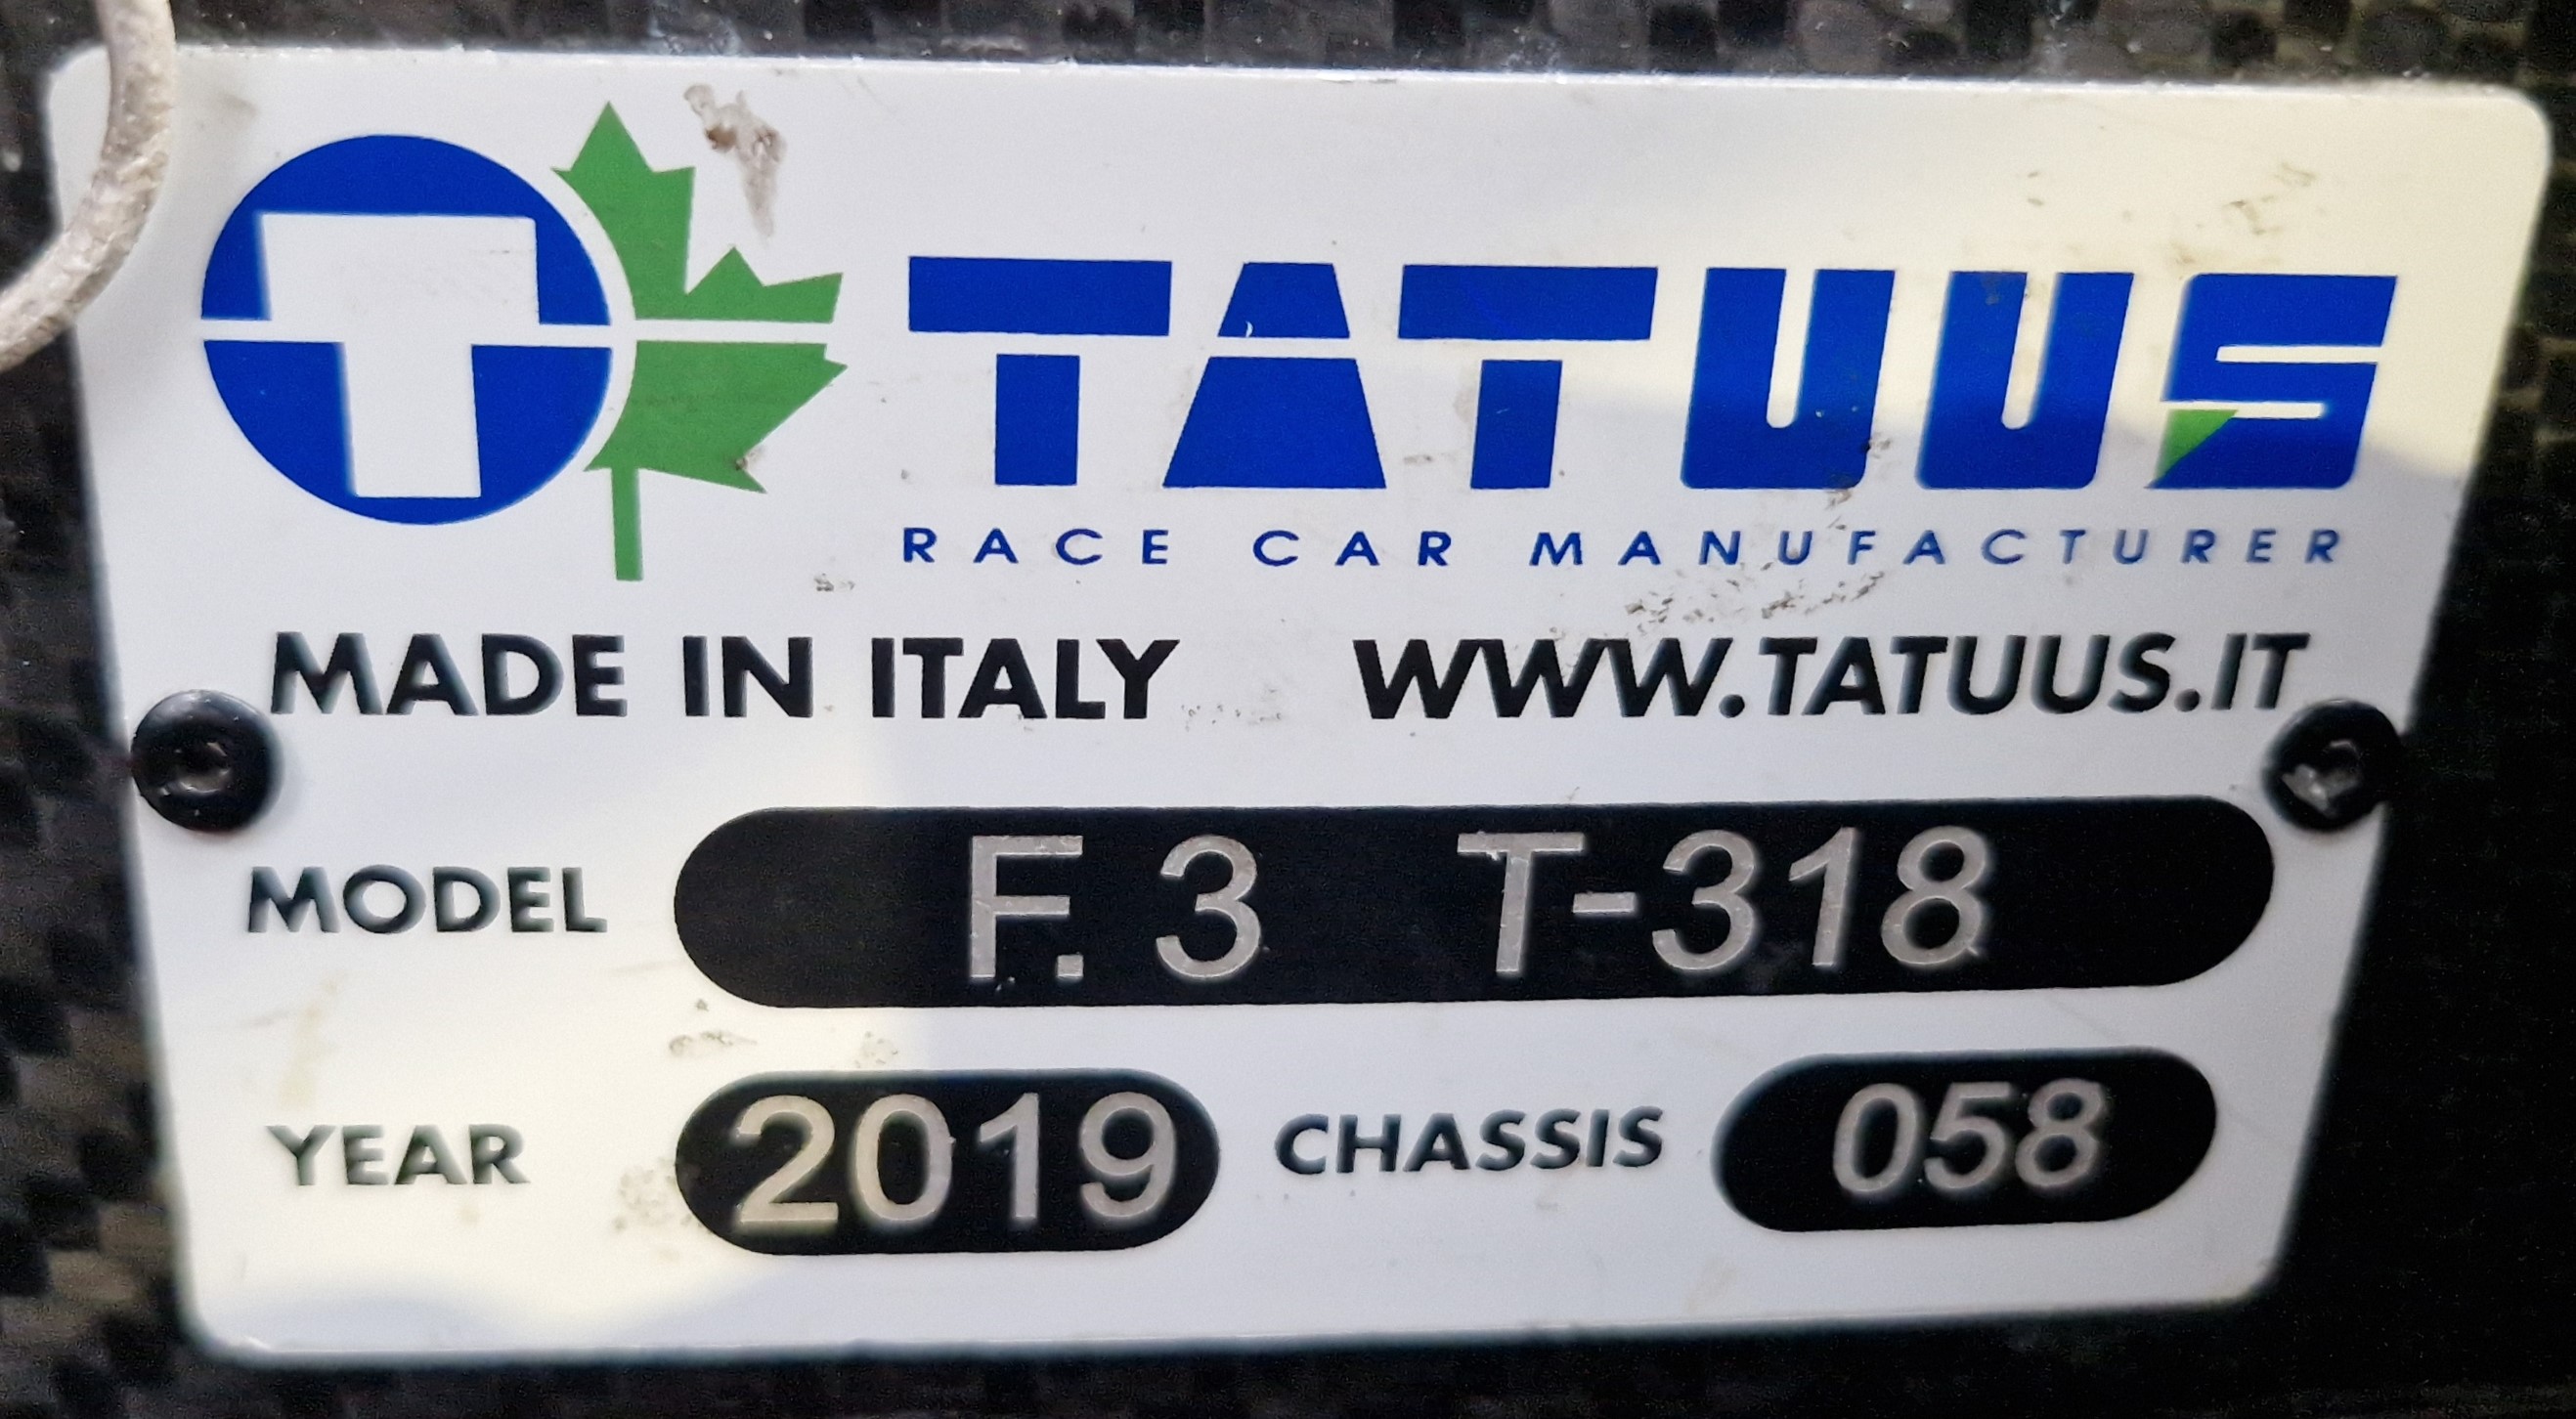 One TATUUS F3 T-318 Alfa Romeo Race Car Chassis No. 058 (2019) Finished in QUANTFURY Win The Right - Image 6 of 10